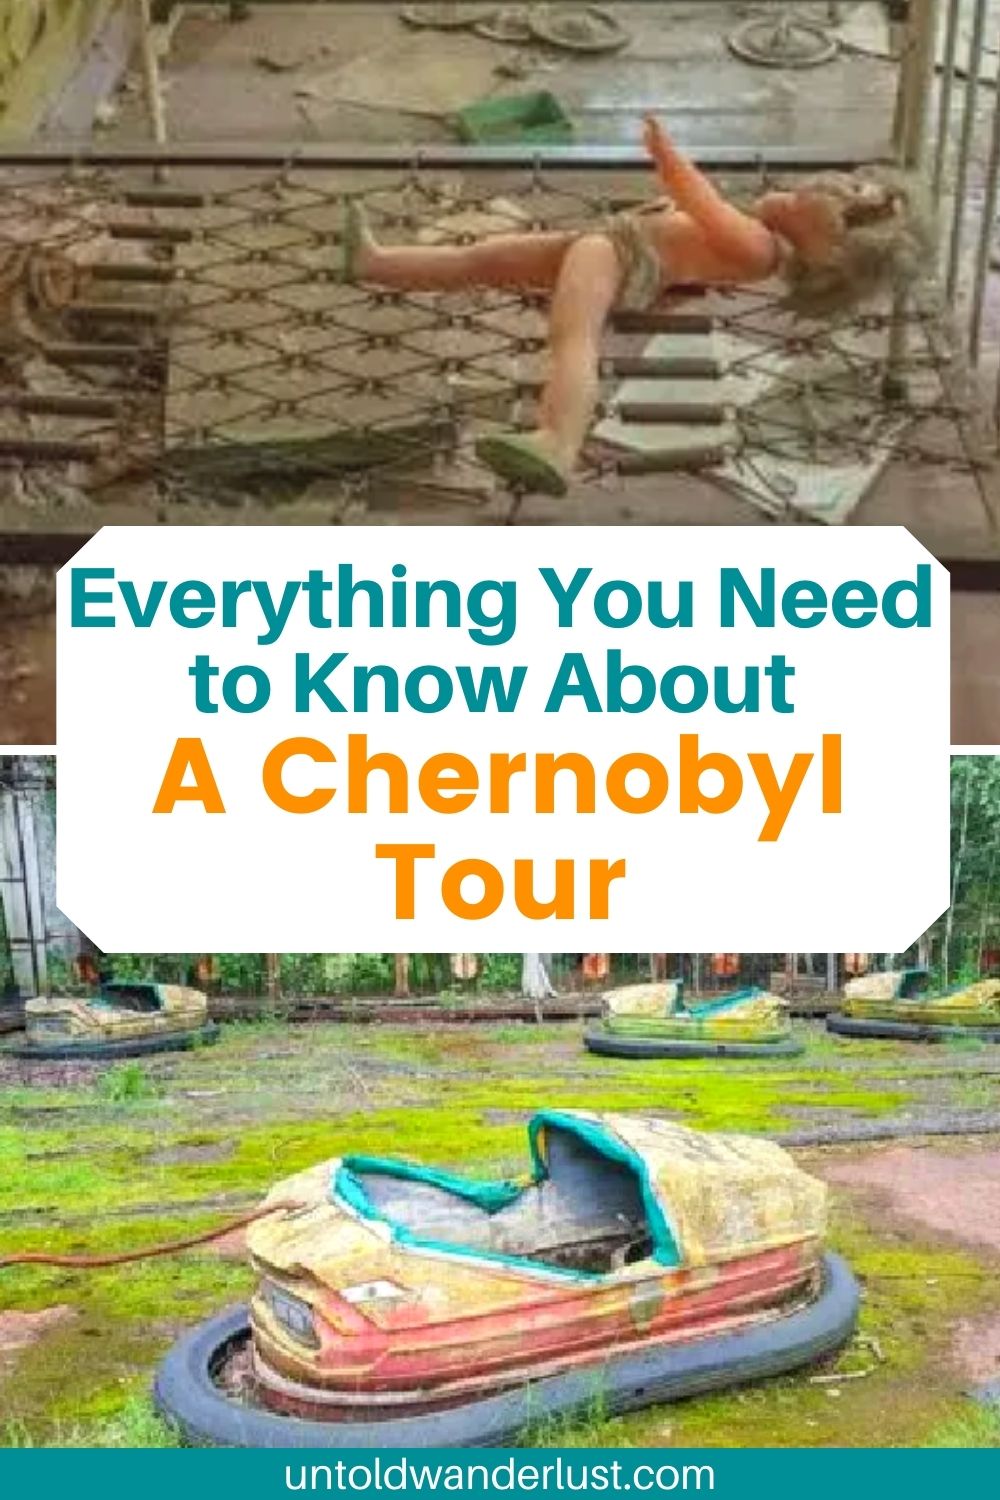 Everything You Need to Know About a Chernobyl Tour